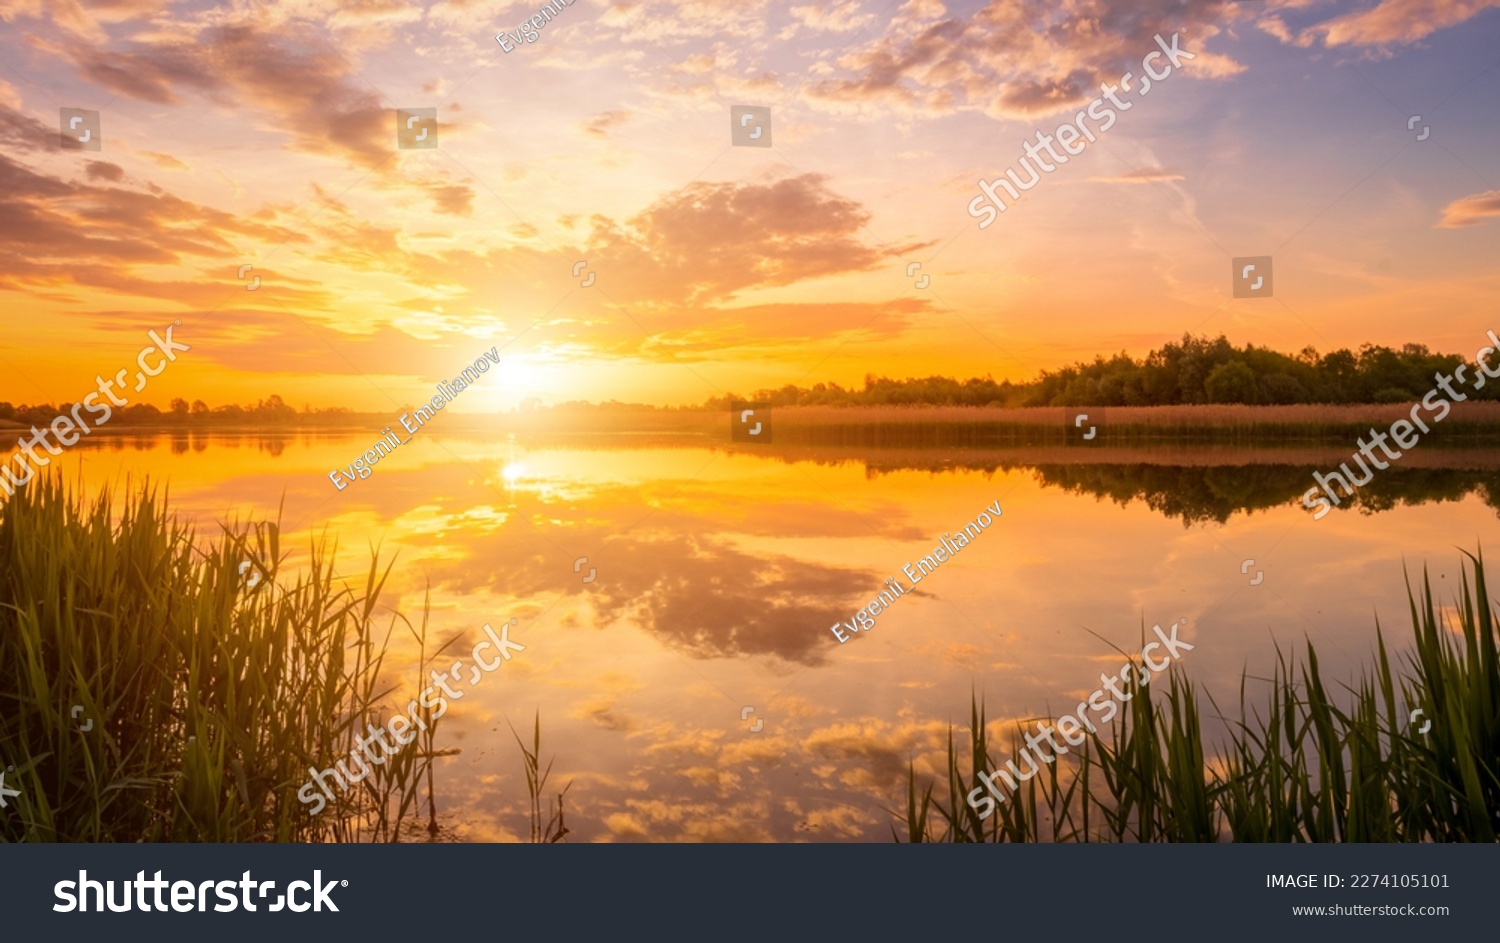 Scenic view of beautiful sunset or sunrise above the pond or lake at spring or early summer evening with cloudy sky background and reed grass at foreground. Landscape. Water reflection. #2274105101